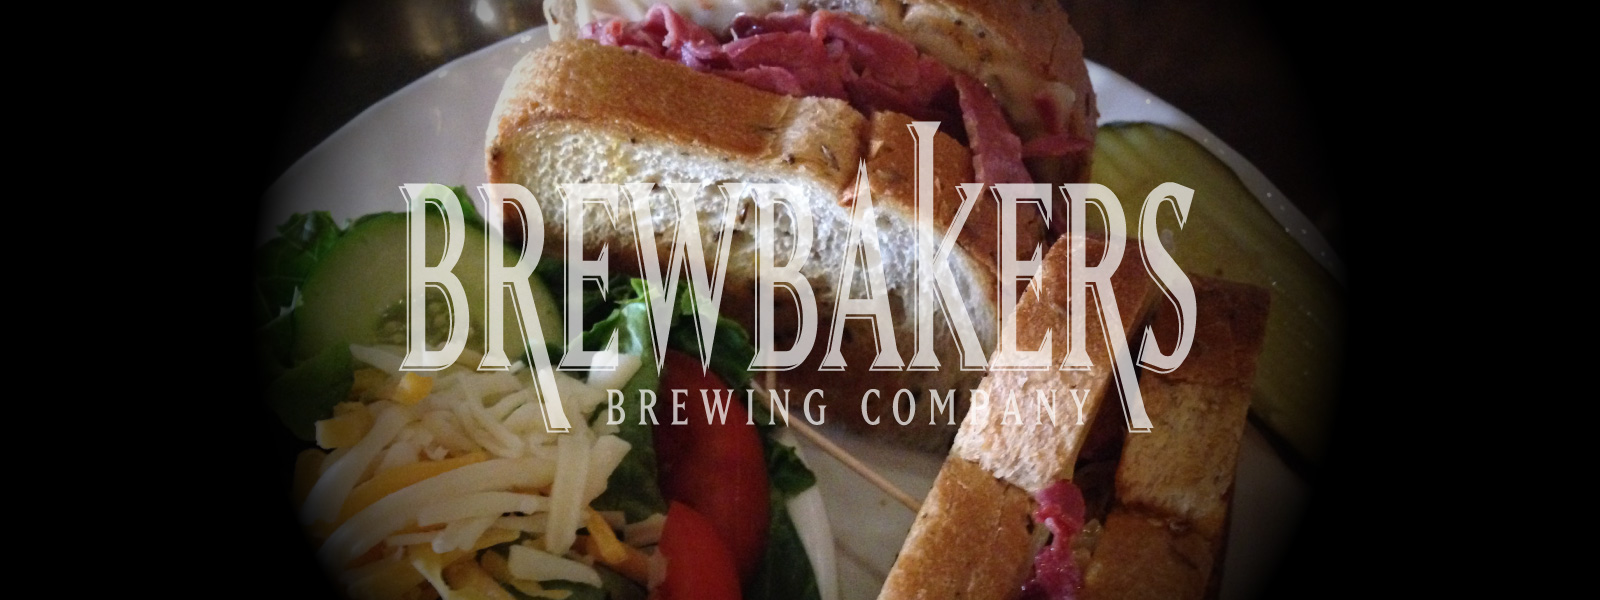 Brewbakers Brewing Company